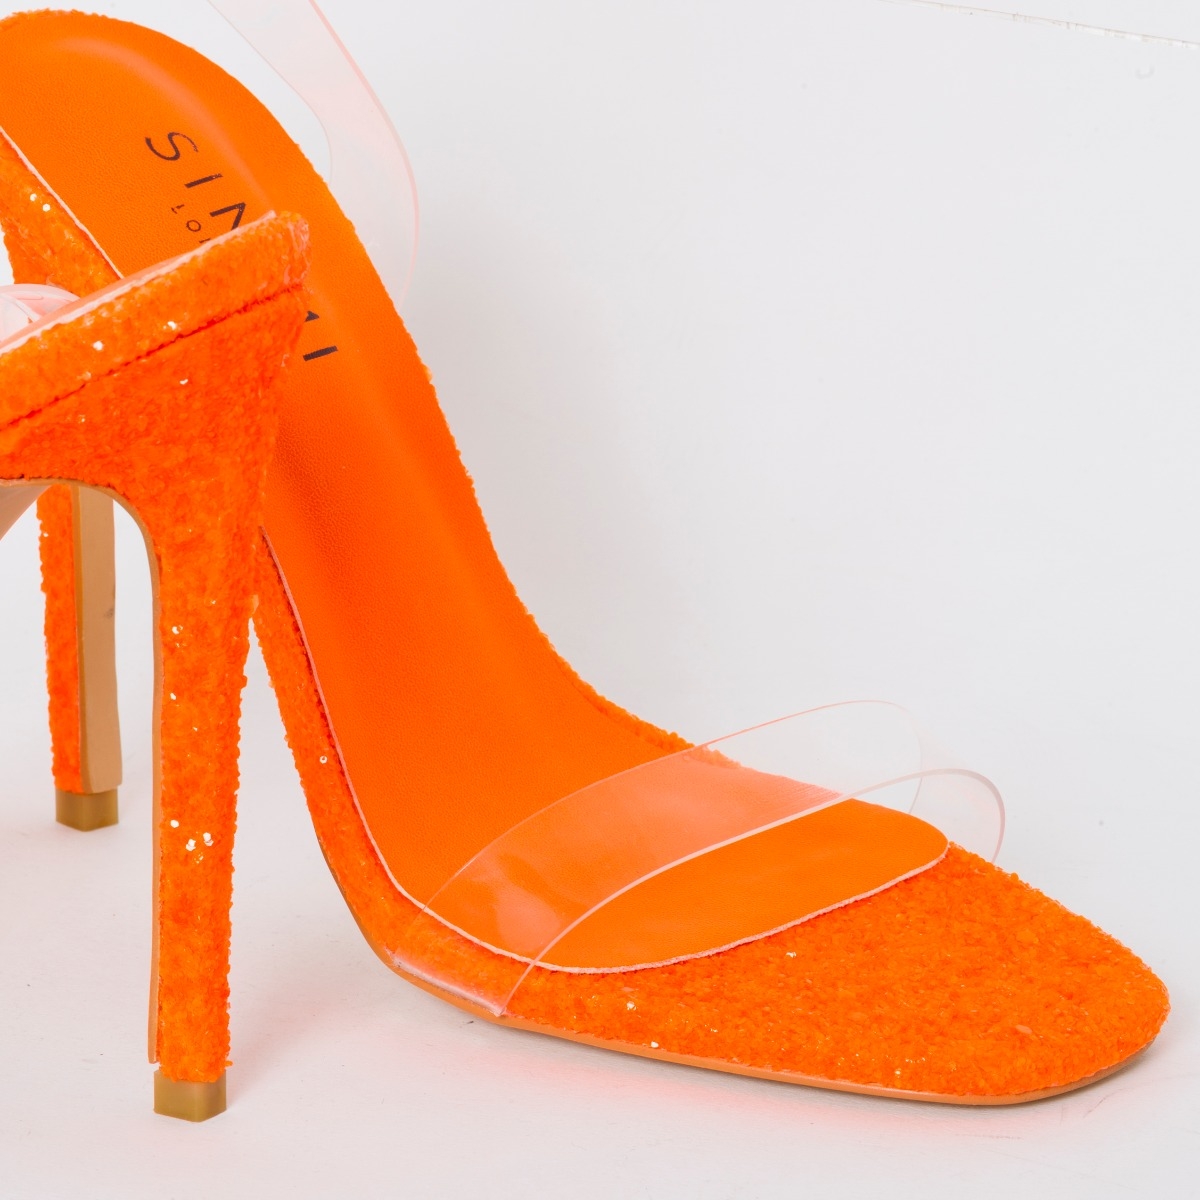 16cm Orange Sexy Heeled Sandals Fetish Bright Pat Surface Buckle STrap Heel  Quality Pointed Toe Women's High Heels - AliExpress